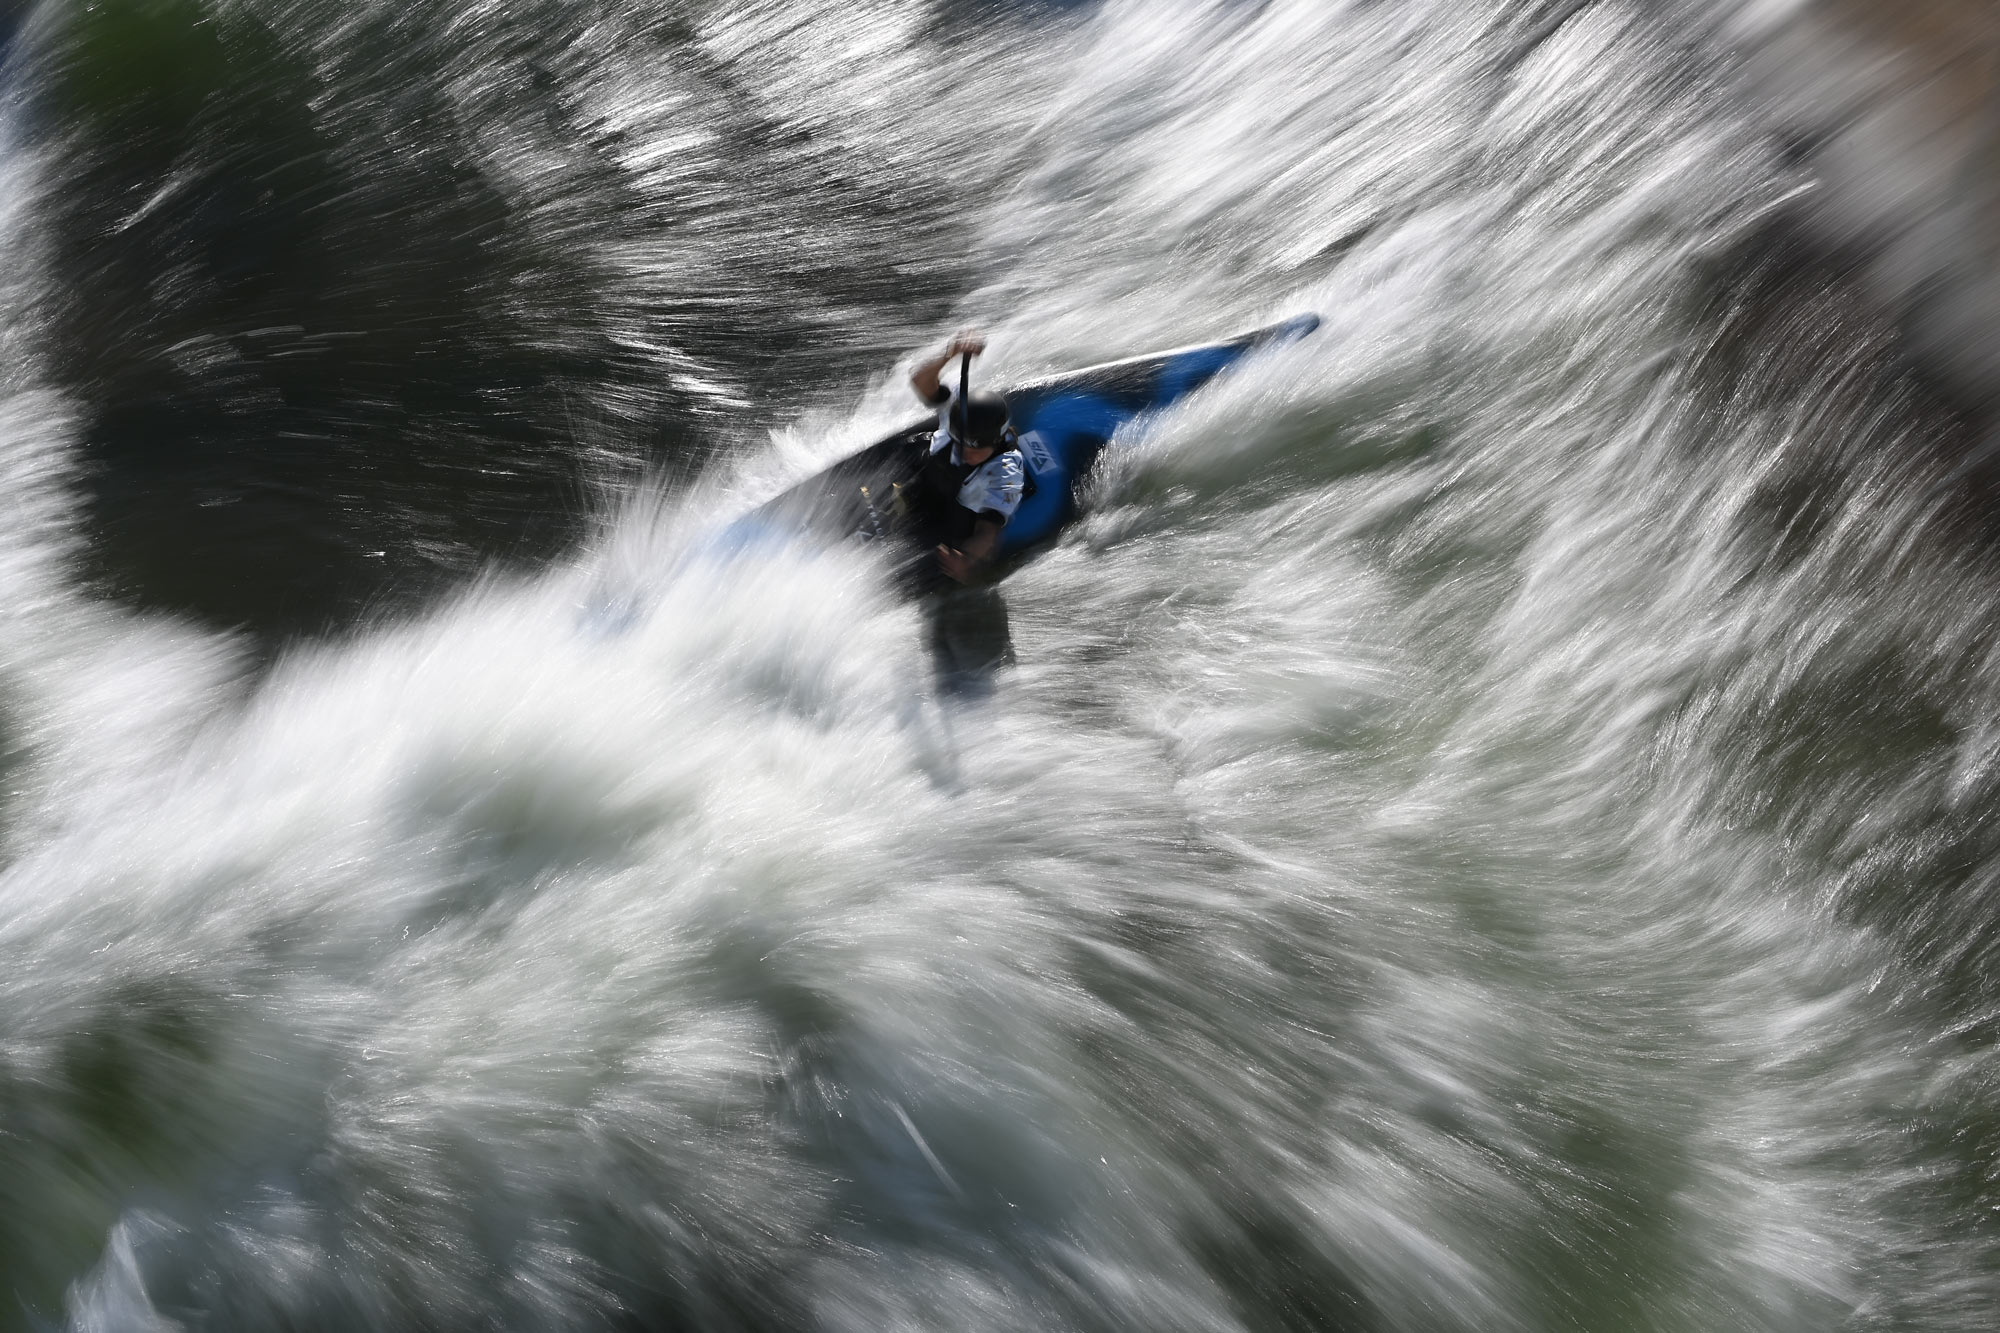 D6 DSLR photo of a kayaker in white water, taken from above